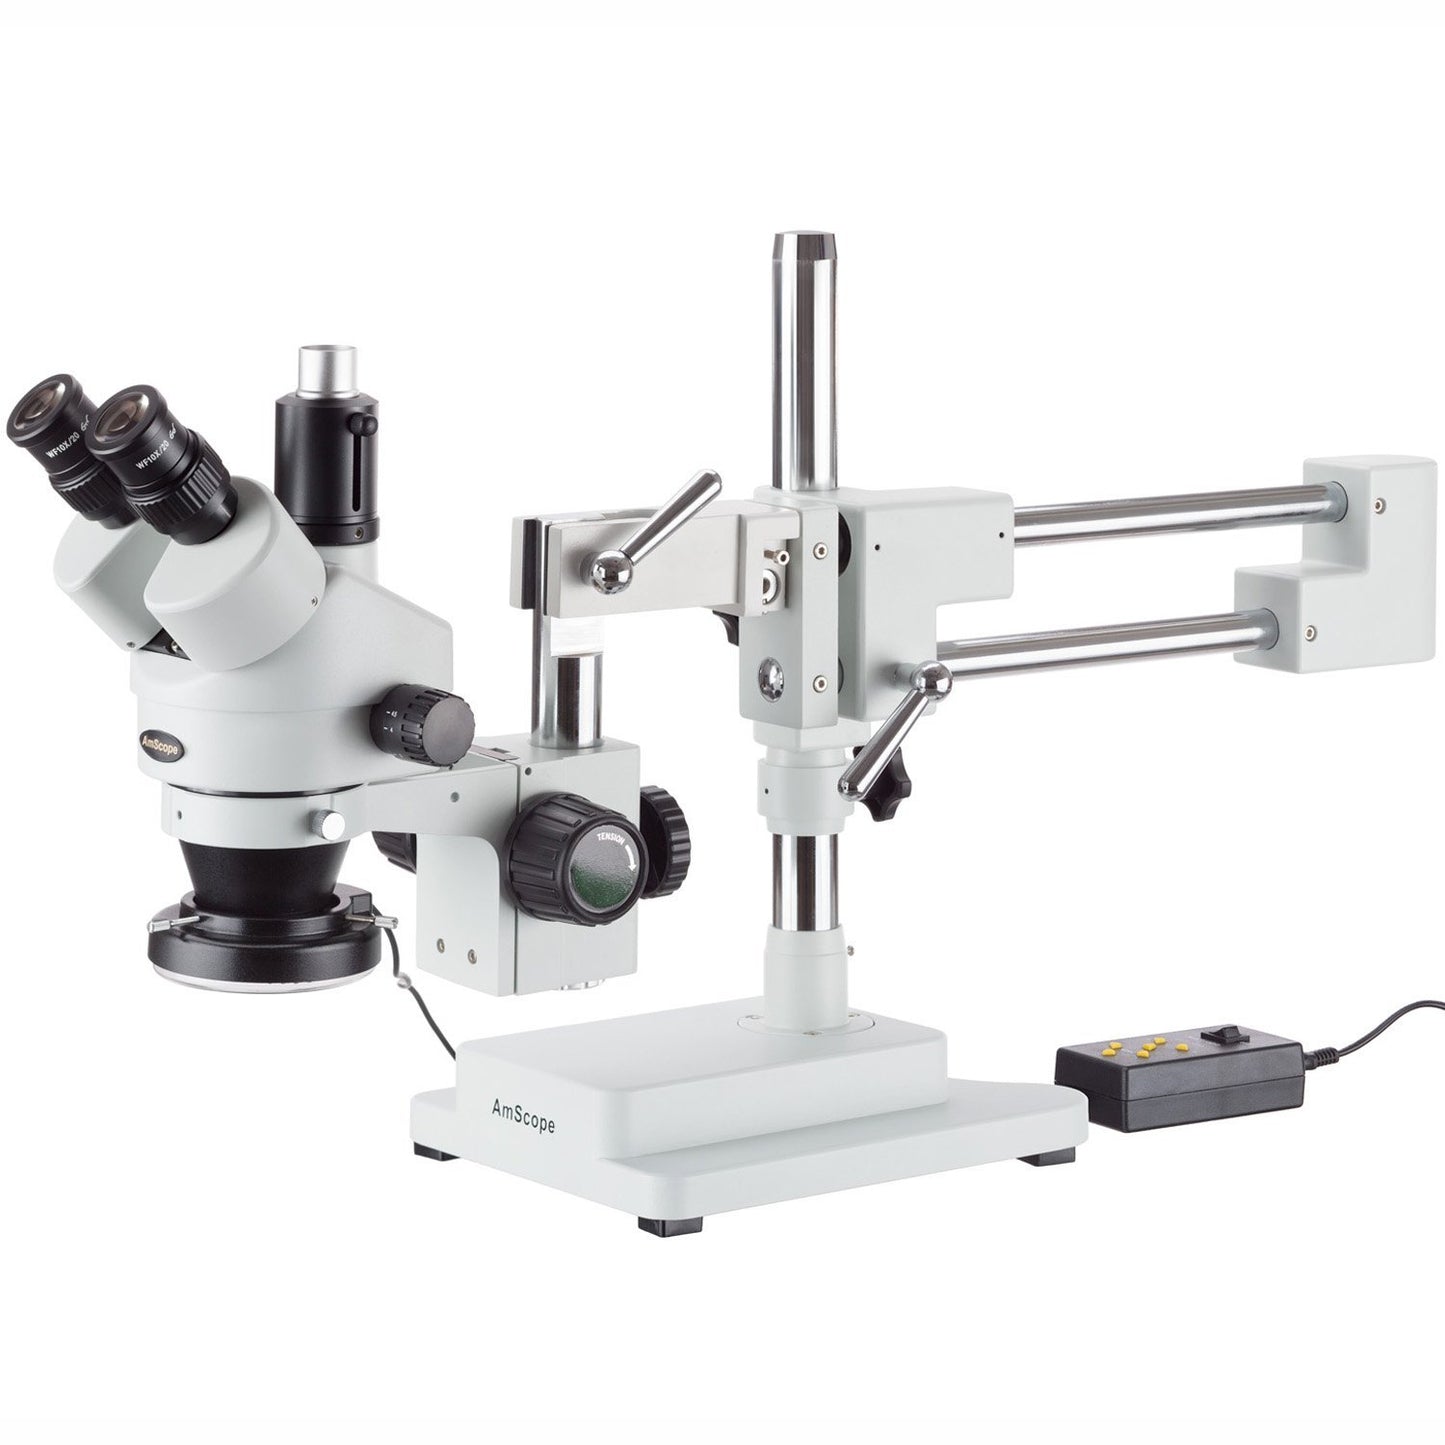 AmScope 3.5X-90X Trinocular Stereo Microscope with 4-Zone 144-LED Ring Light